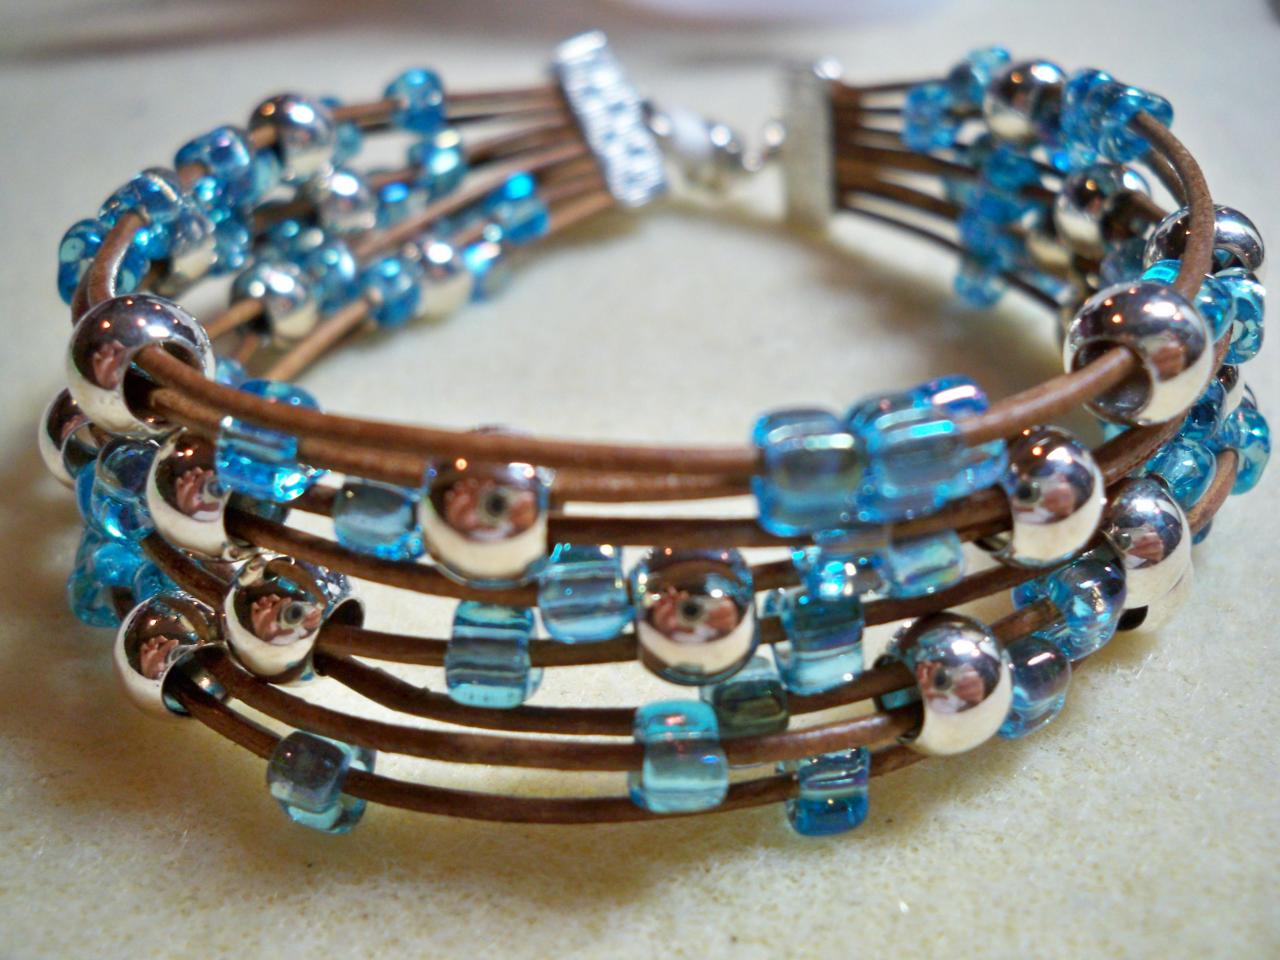 Sea Of Silver Blue Bracelet On Brown Leather